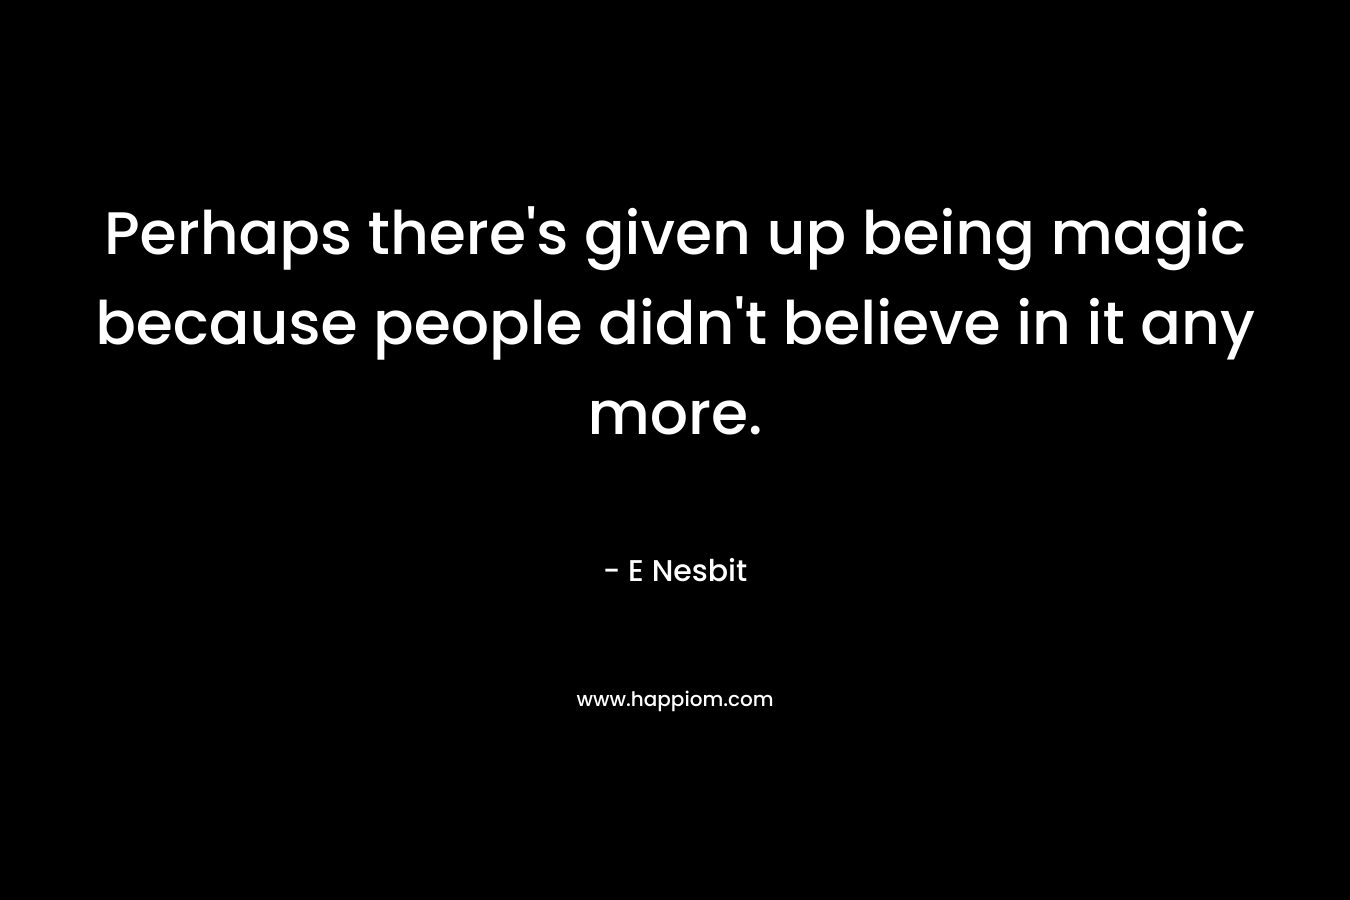 Perhaps there’s given up being magic because people didn’t believe in it any more. – E Nesbit